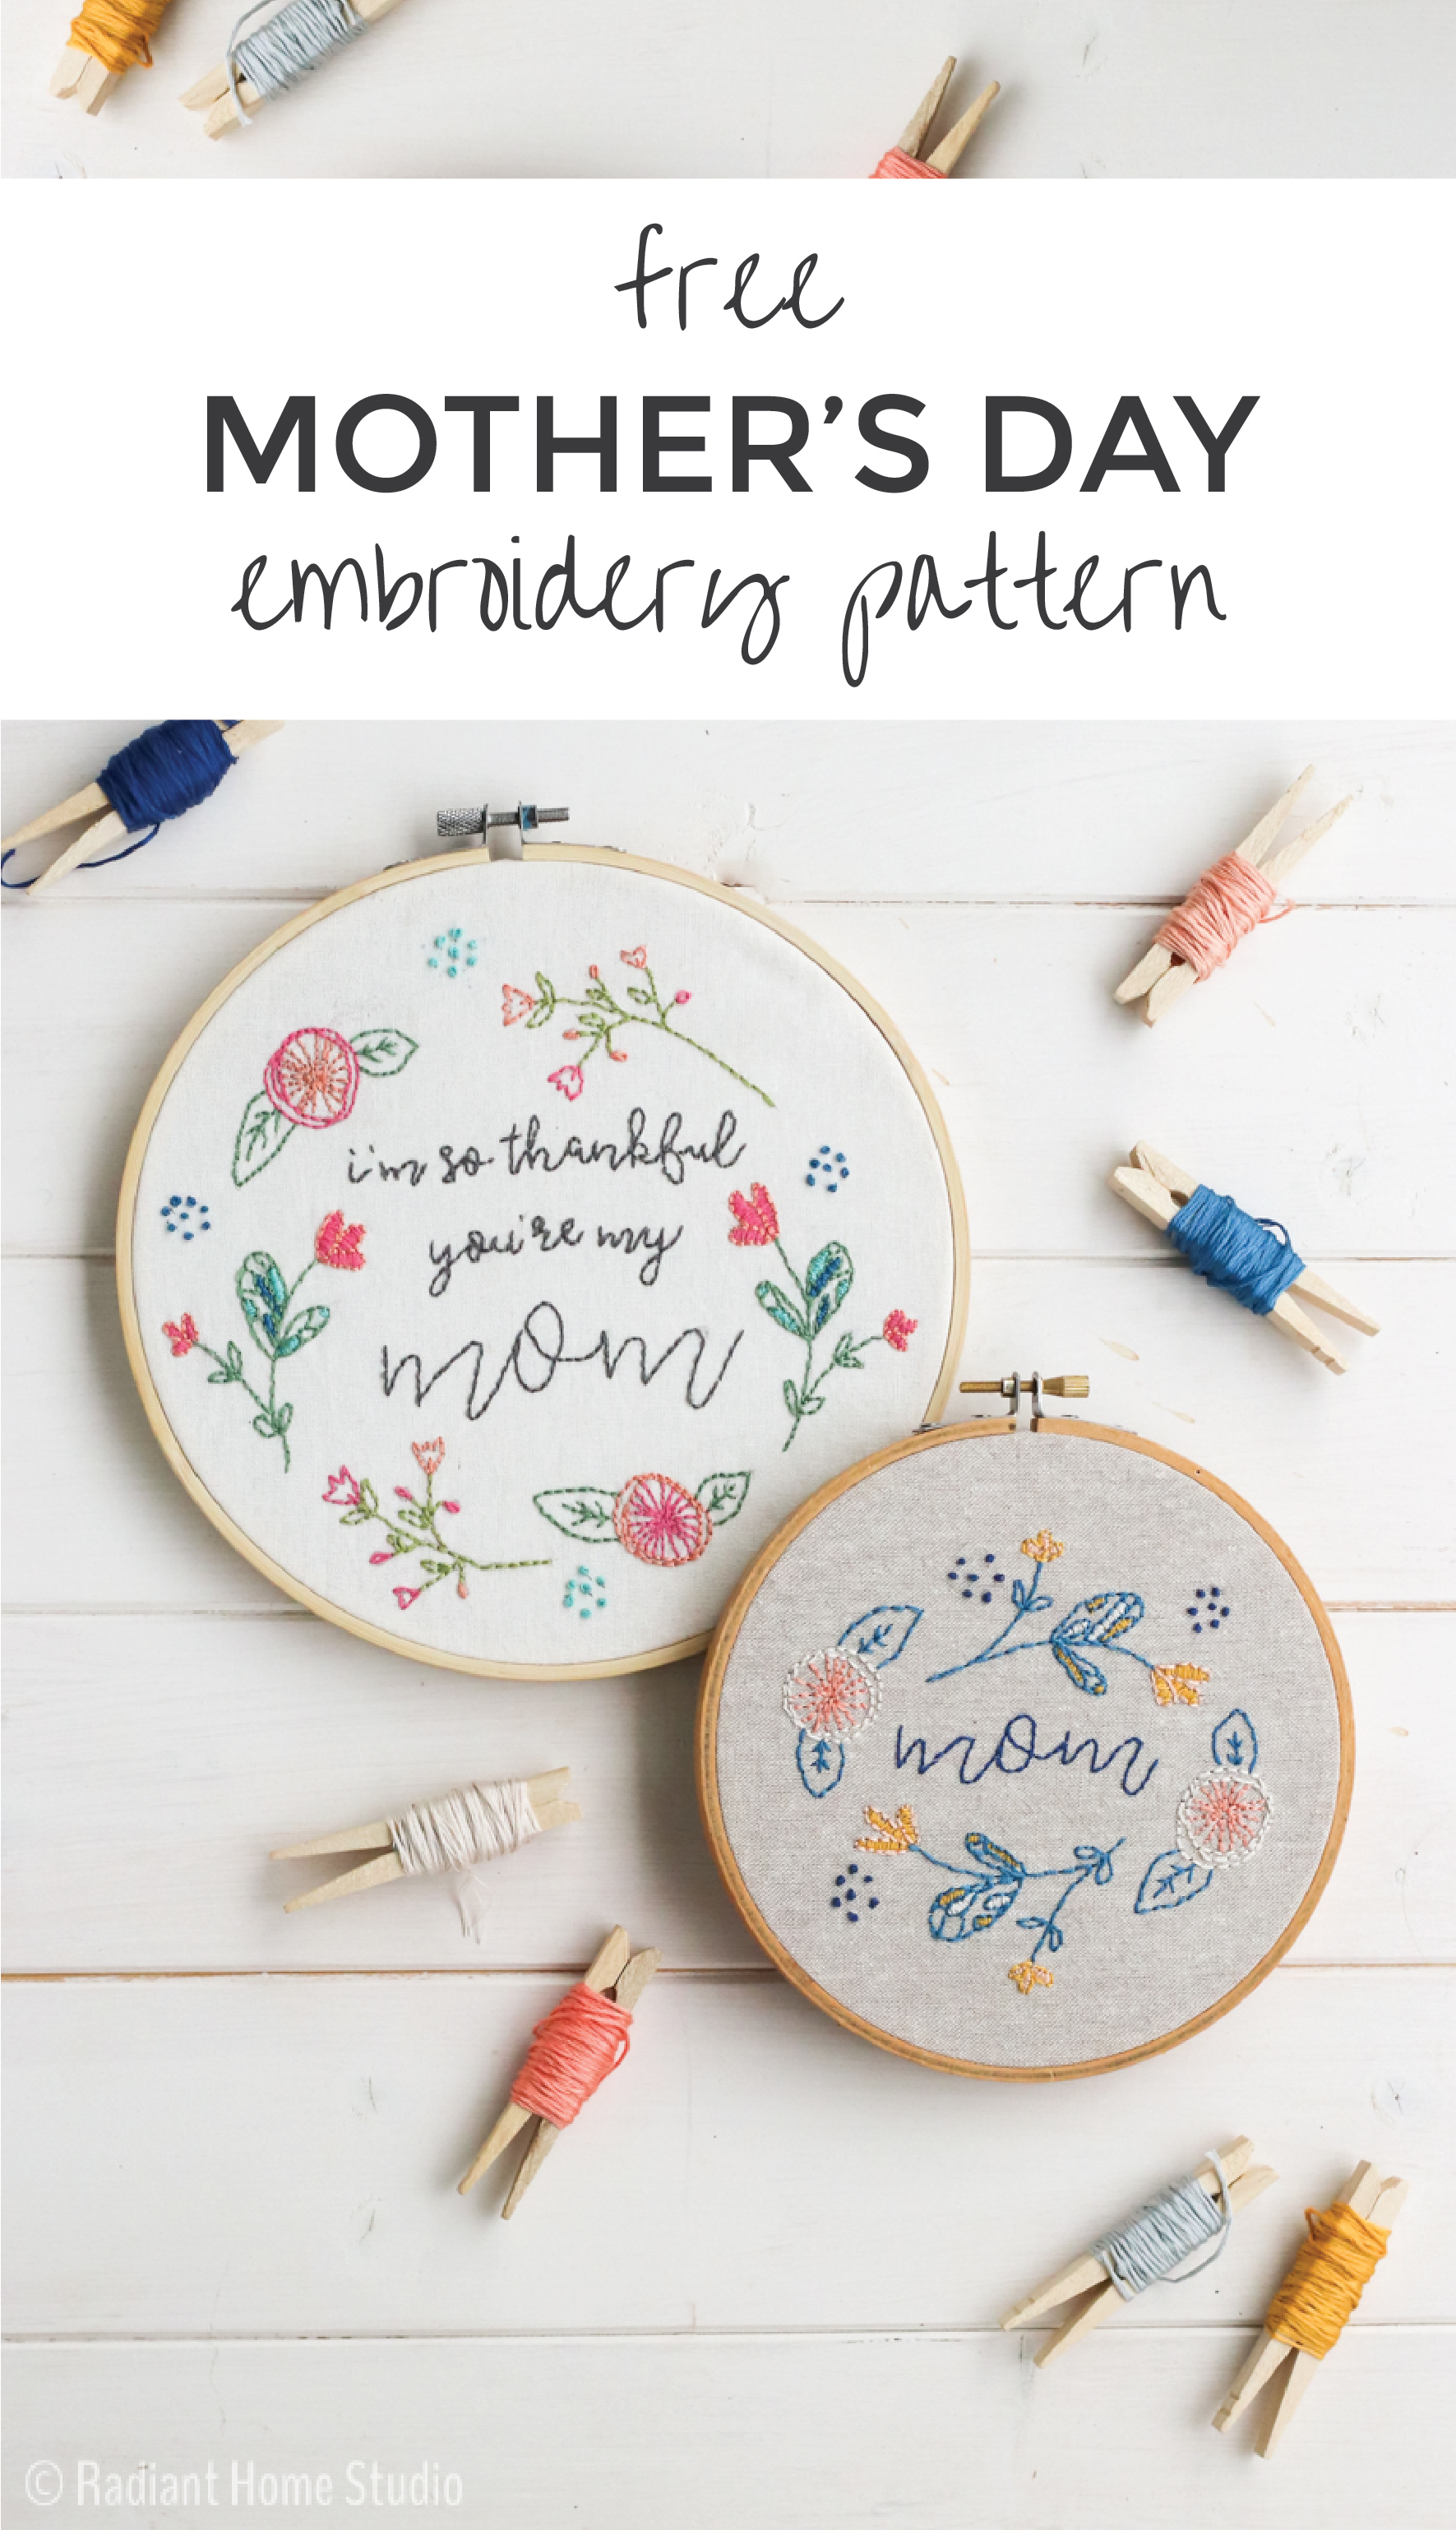 Free Embroidery Pattern Free Mothers Day Embroidery Pattern Radiant Home Studio